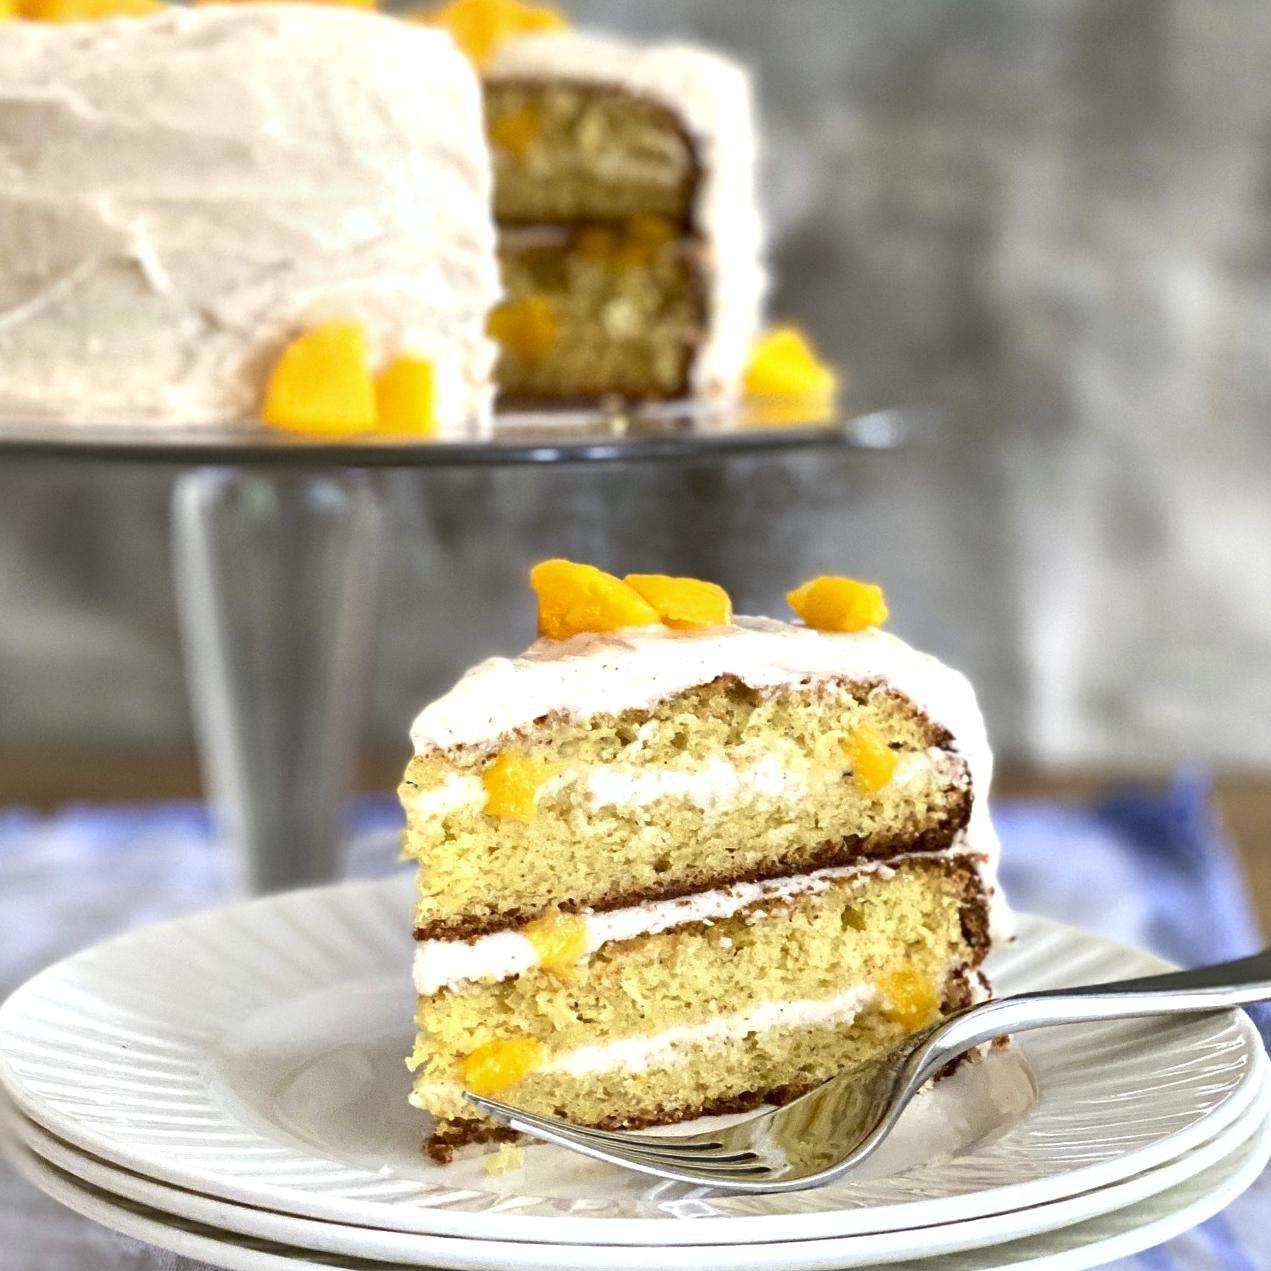 Slice of peach layer cake with the rest of the cake in the background